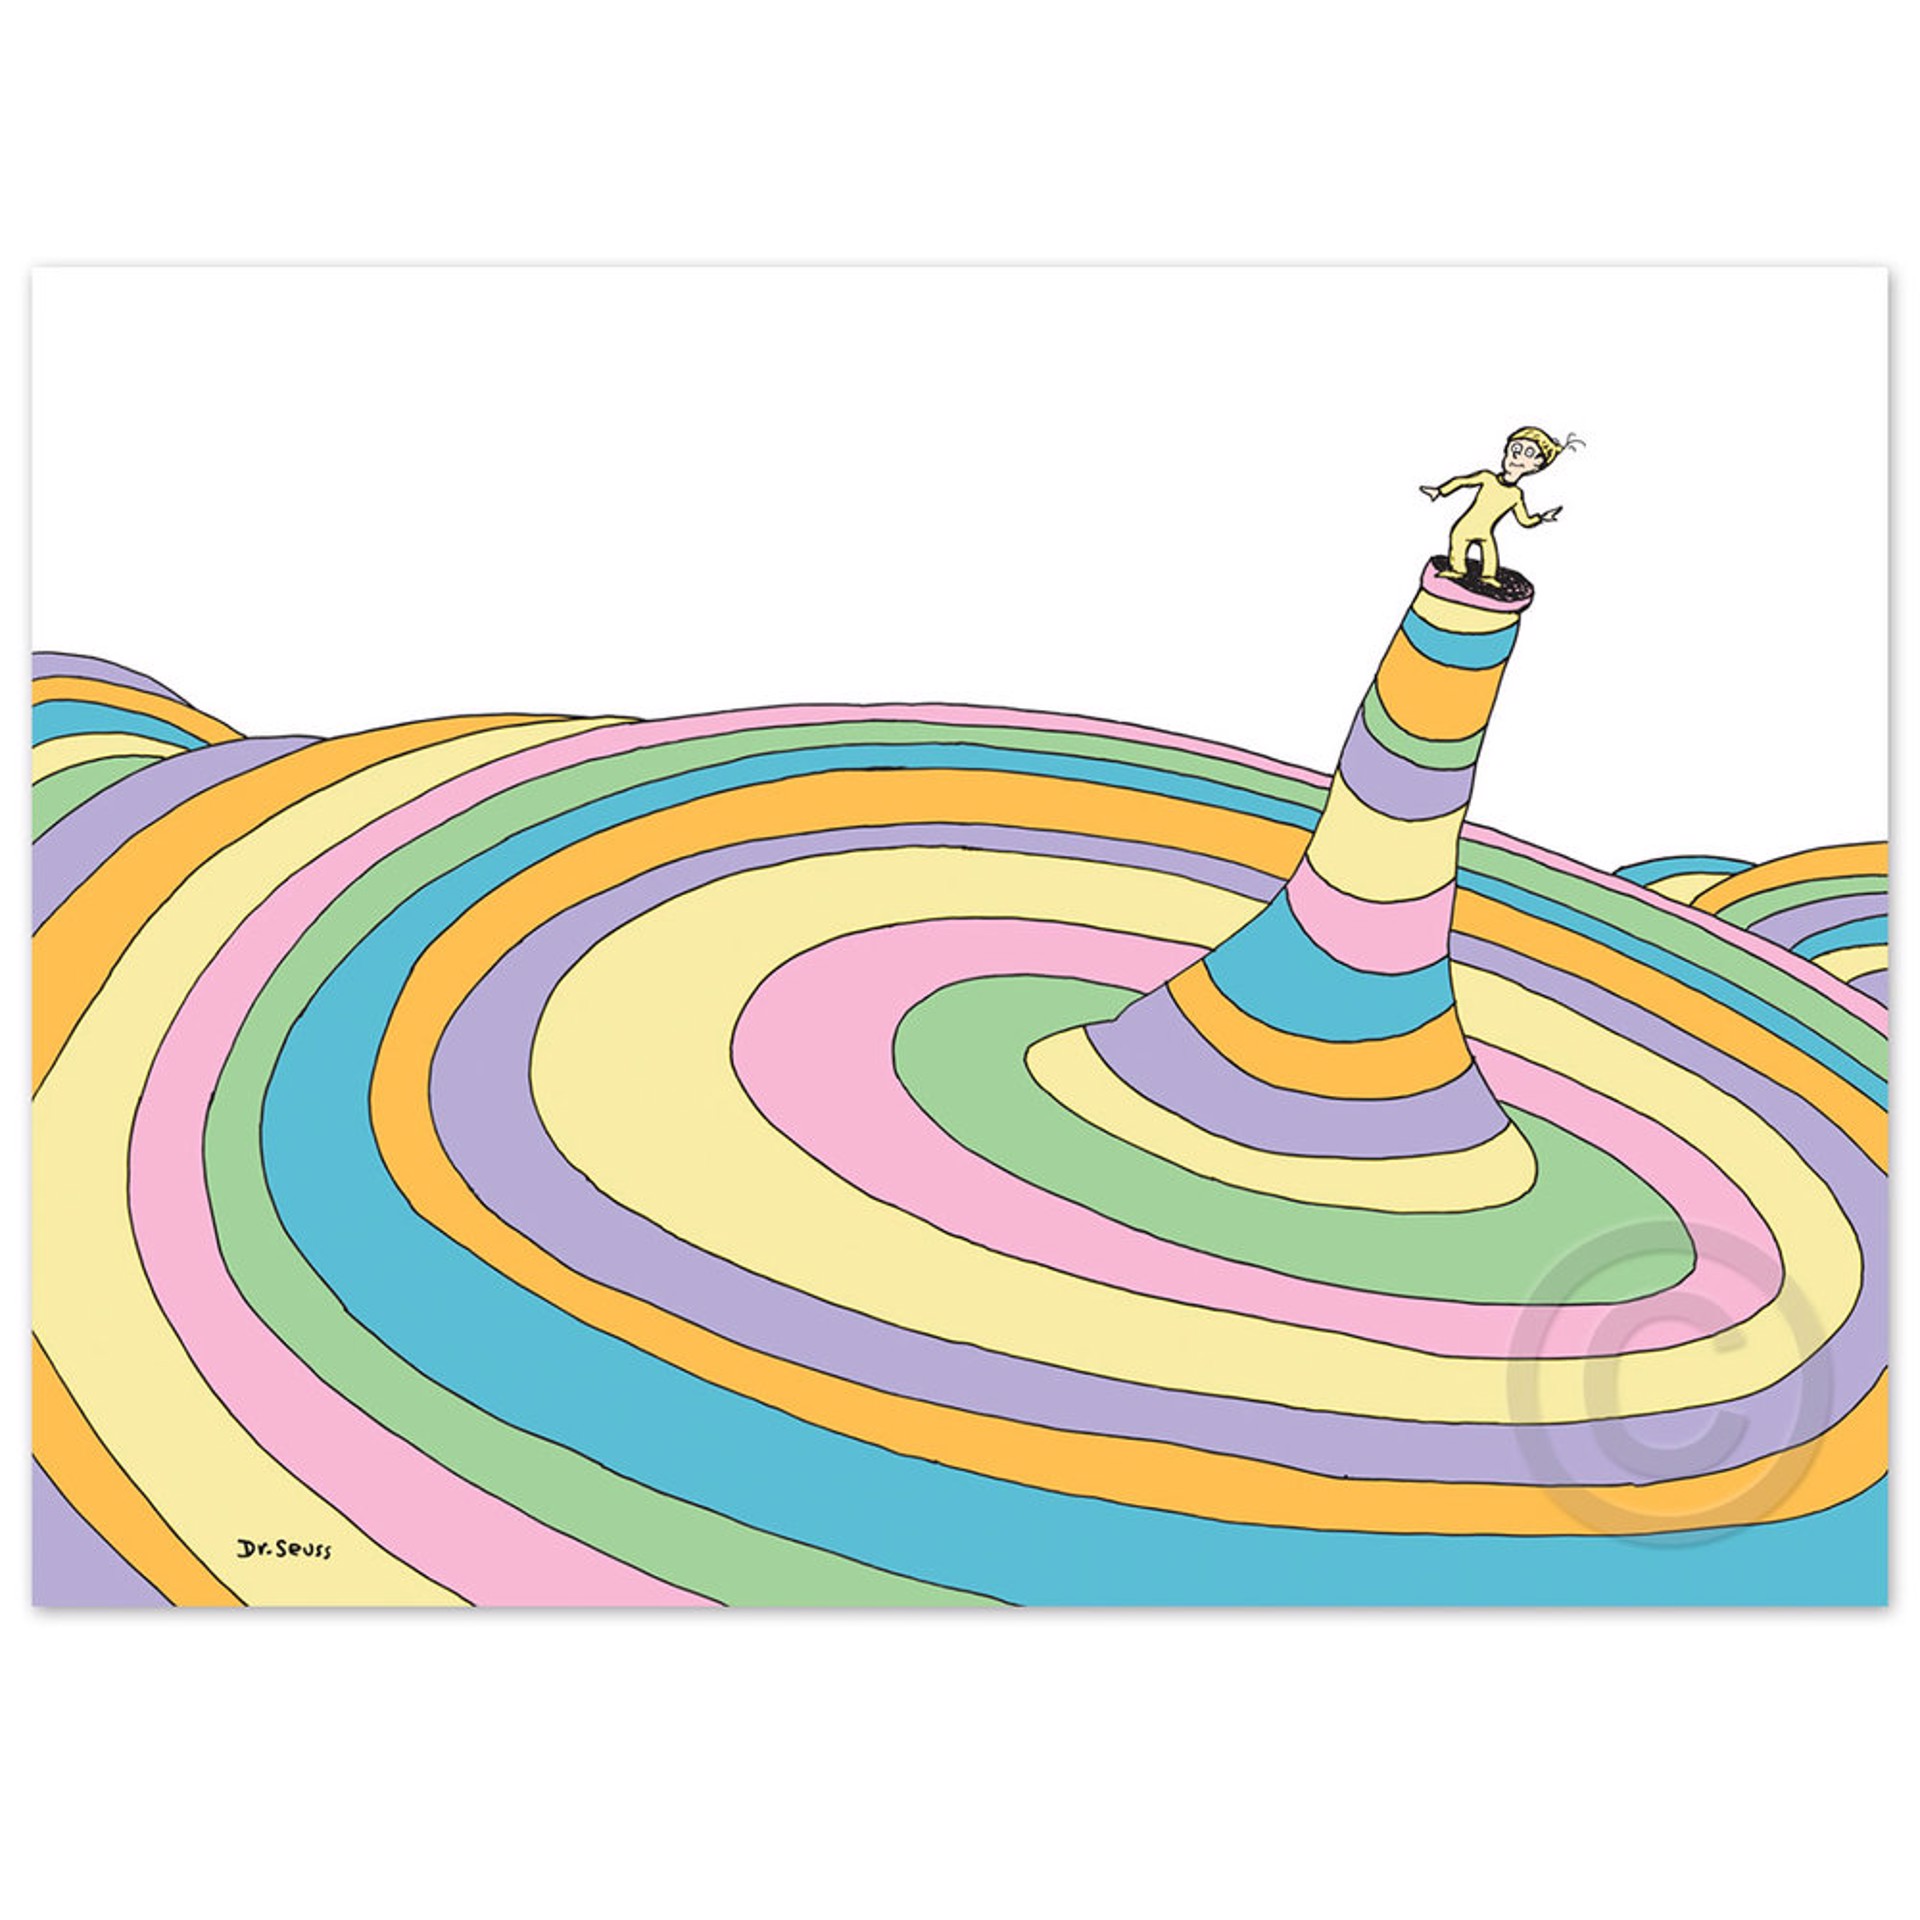 Oh The Places You'll Go! Cover Illustration Deluxe by Dr. Seuss